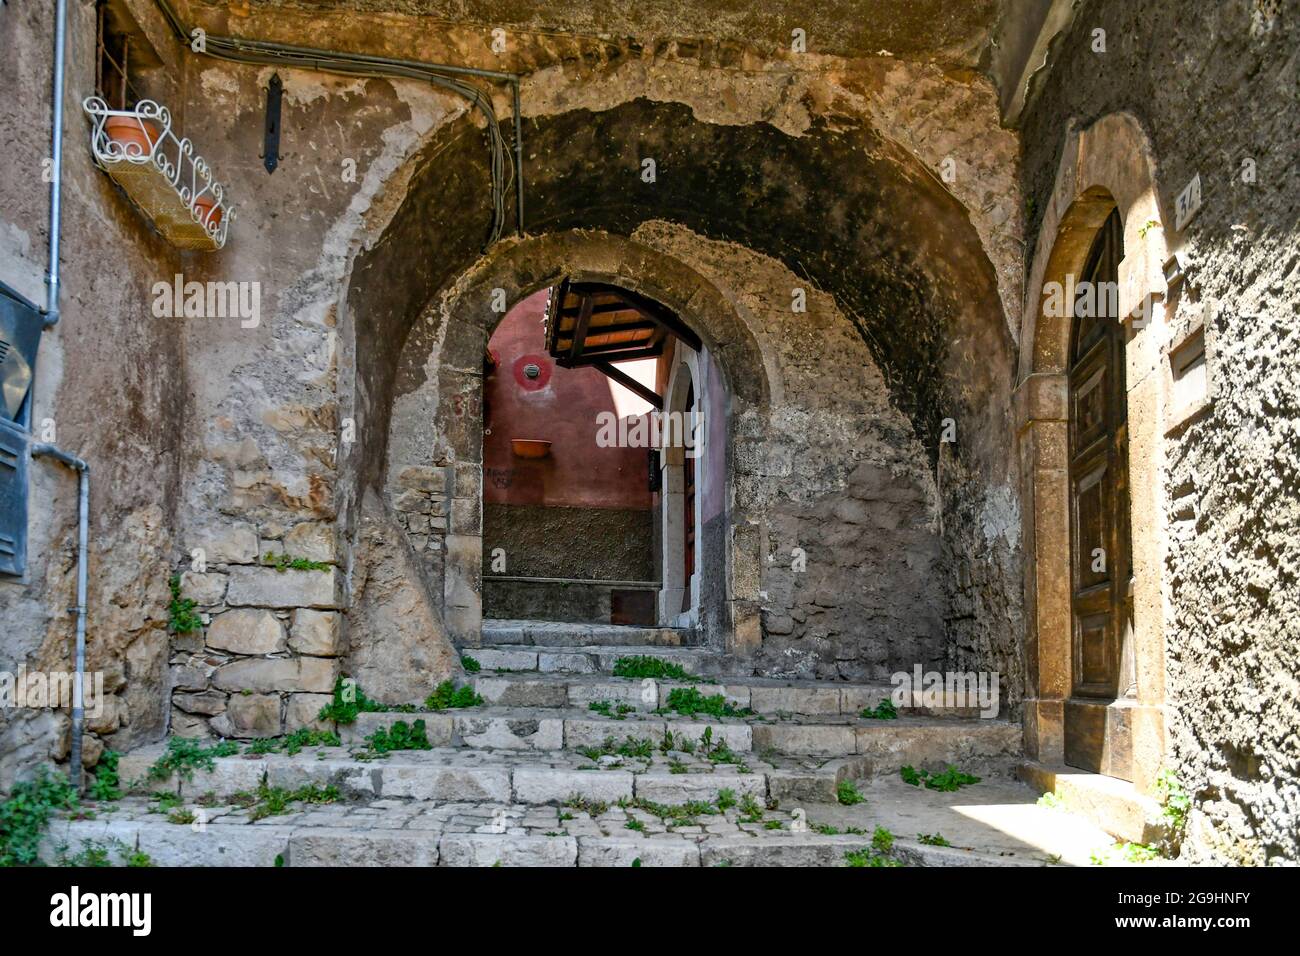 Carpineto Romano, Italy, July 24, 2021. An ancient archway at the entrance to an old building in a medieval town in the Lazio region. Stock Photo